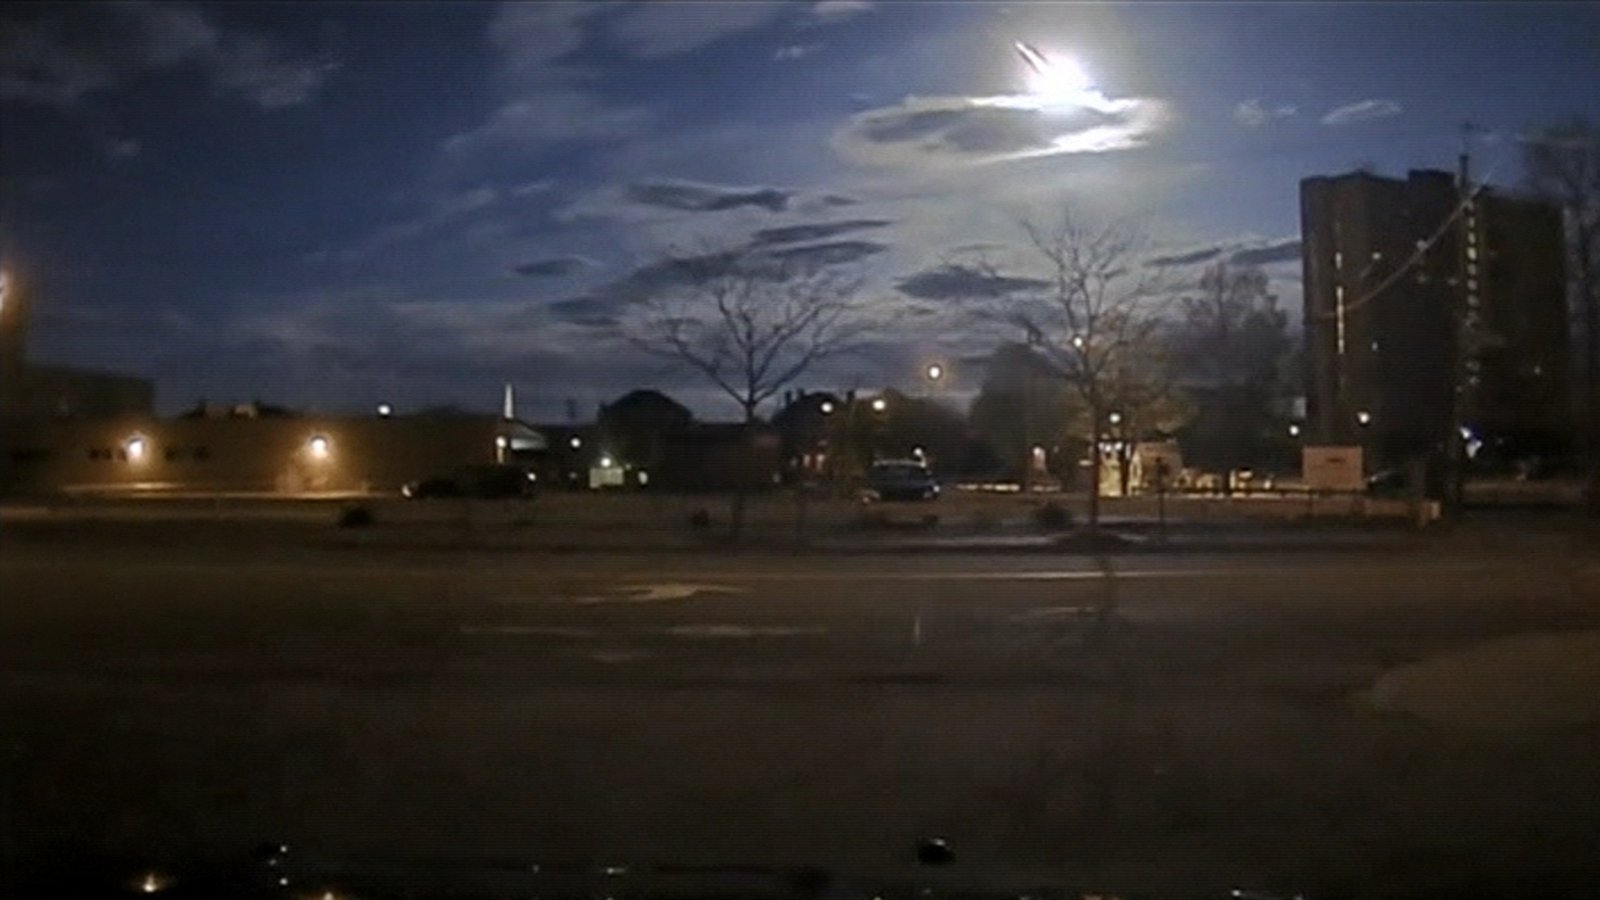 Meteor lights up skies above Maine